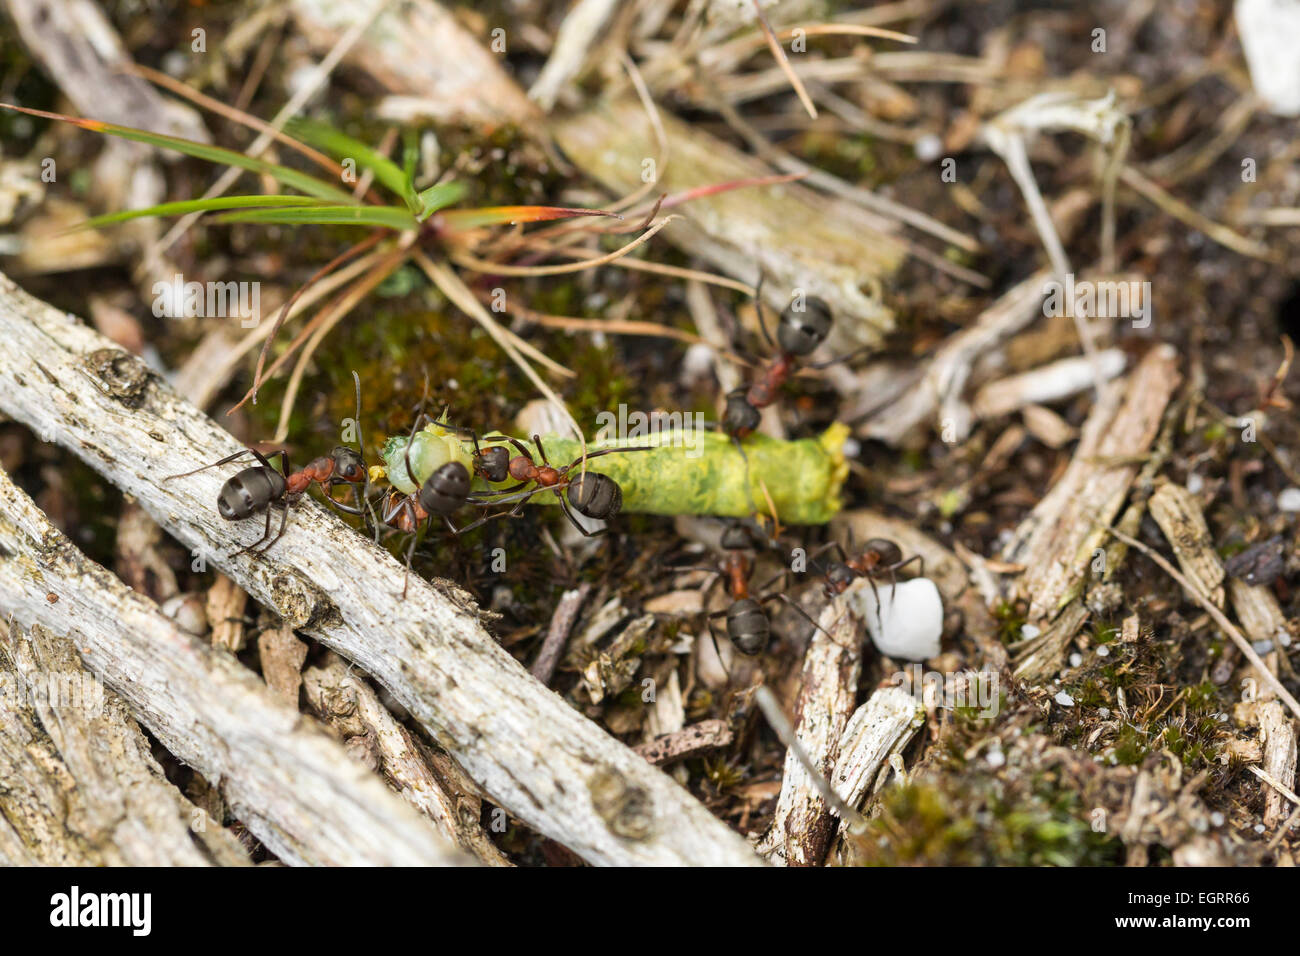 Red wood ant Formica rufa, soldiers with caught caterpillar prey, dragging back to nest, Arne, Dorset, UK in May. Stock Photo